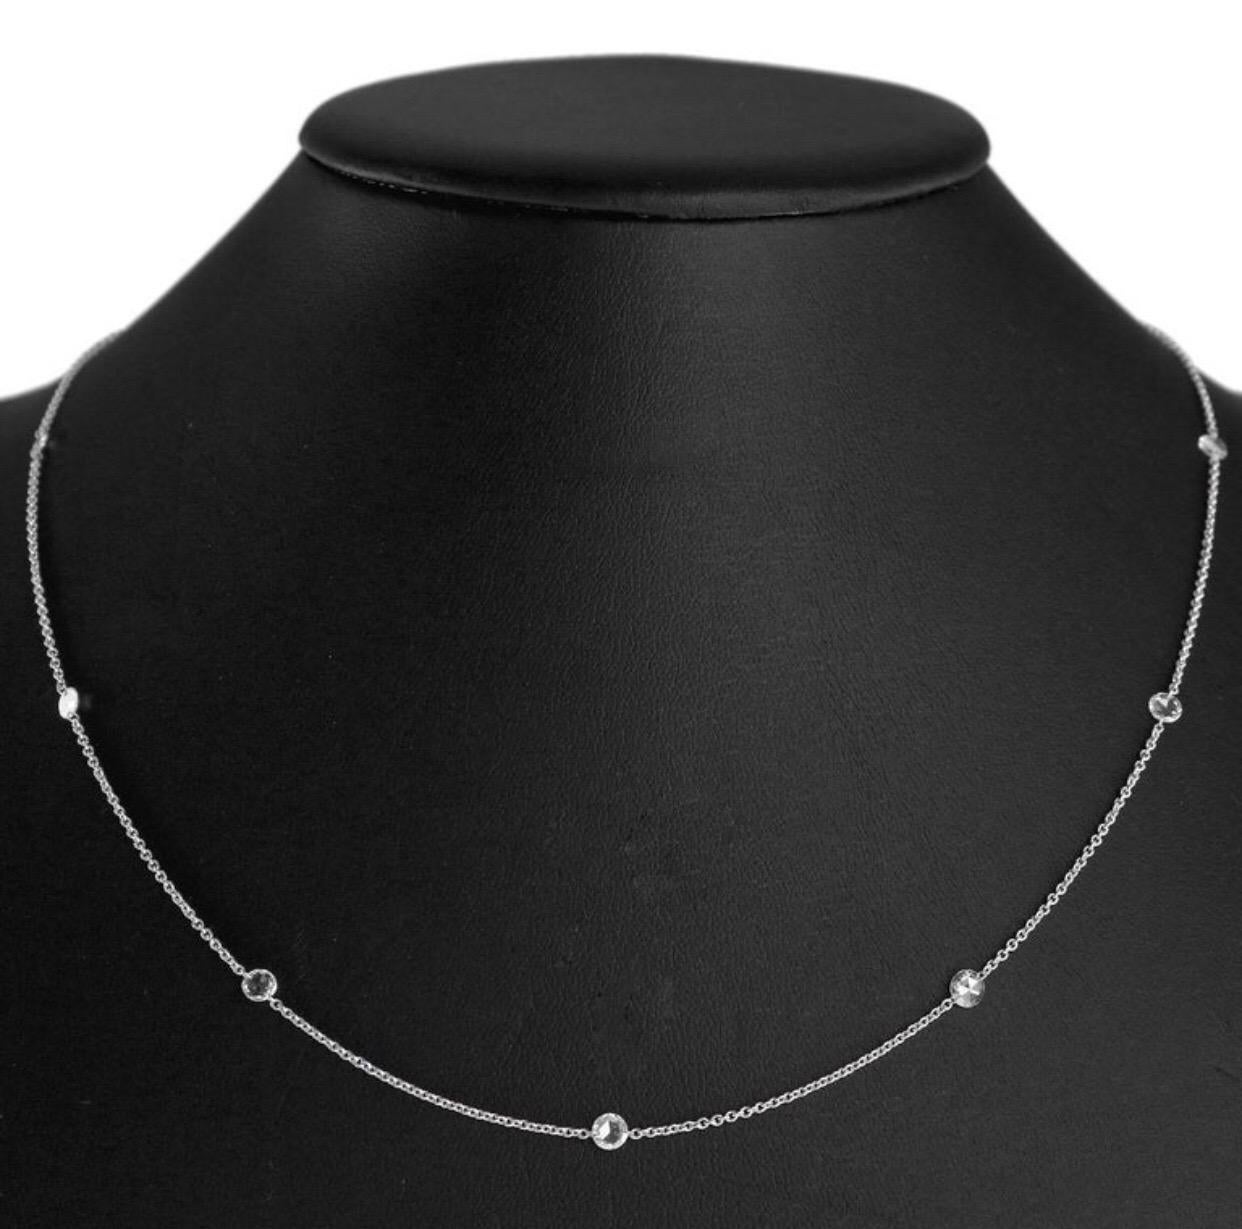 PANIM 1 Carat Rosecut Diamond Circles Necklace in 18K White Gold

A day to day wear styled similar to diamond by the yard patter 18K White Gold with perfectly crafted 10pcs of Rosecut diamond weight upto 1cts.
Diamonds are of top collection quality